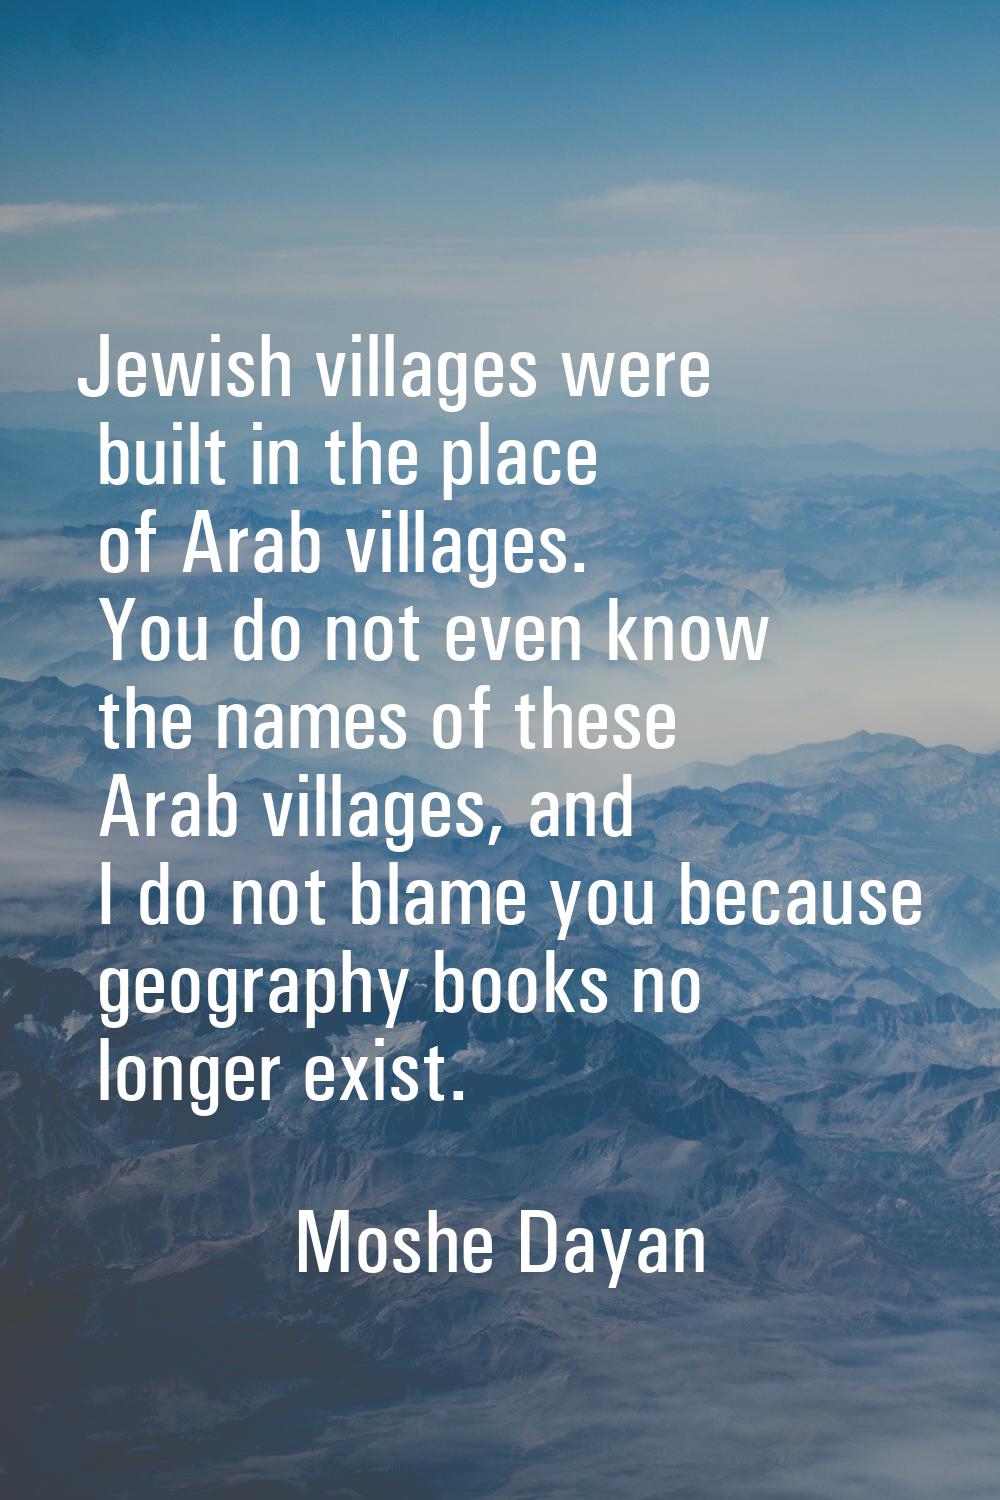 Jewish villages were built in the place of Arab villages. You do not even know the names of these A